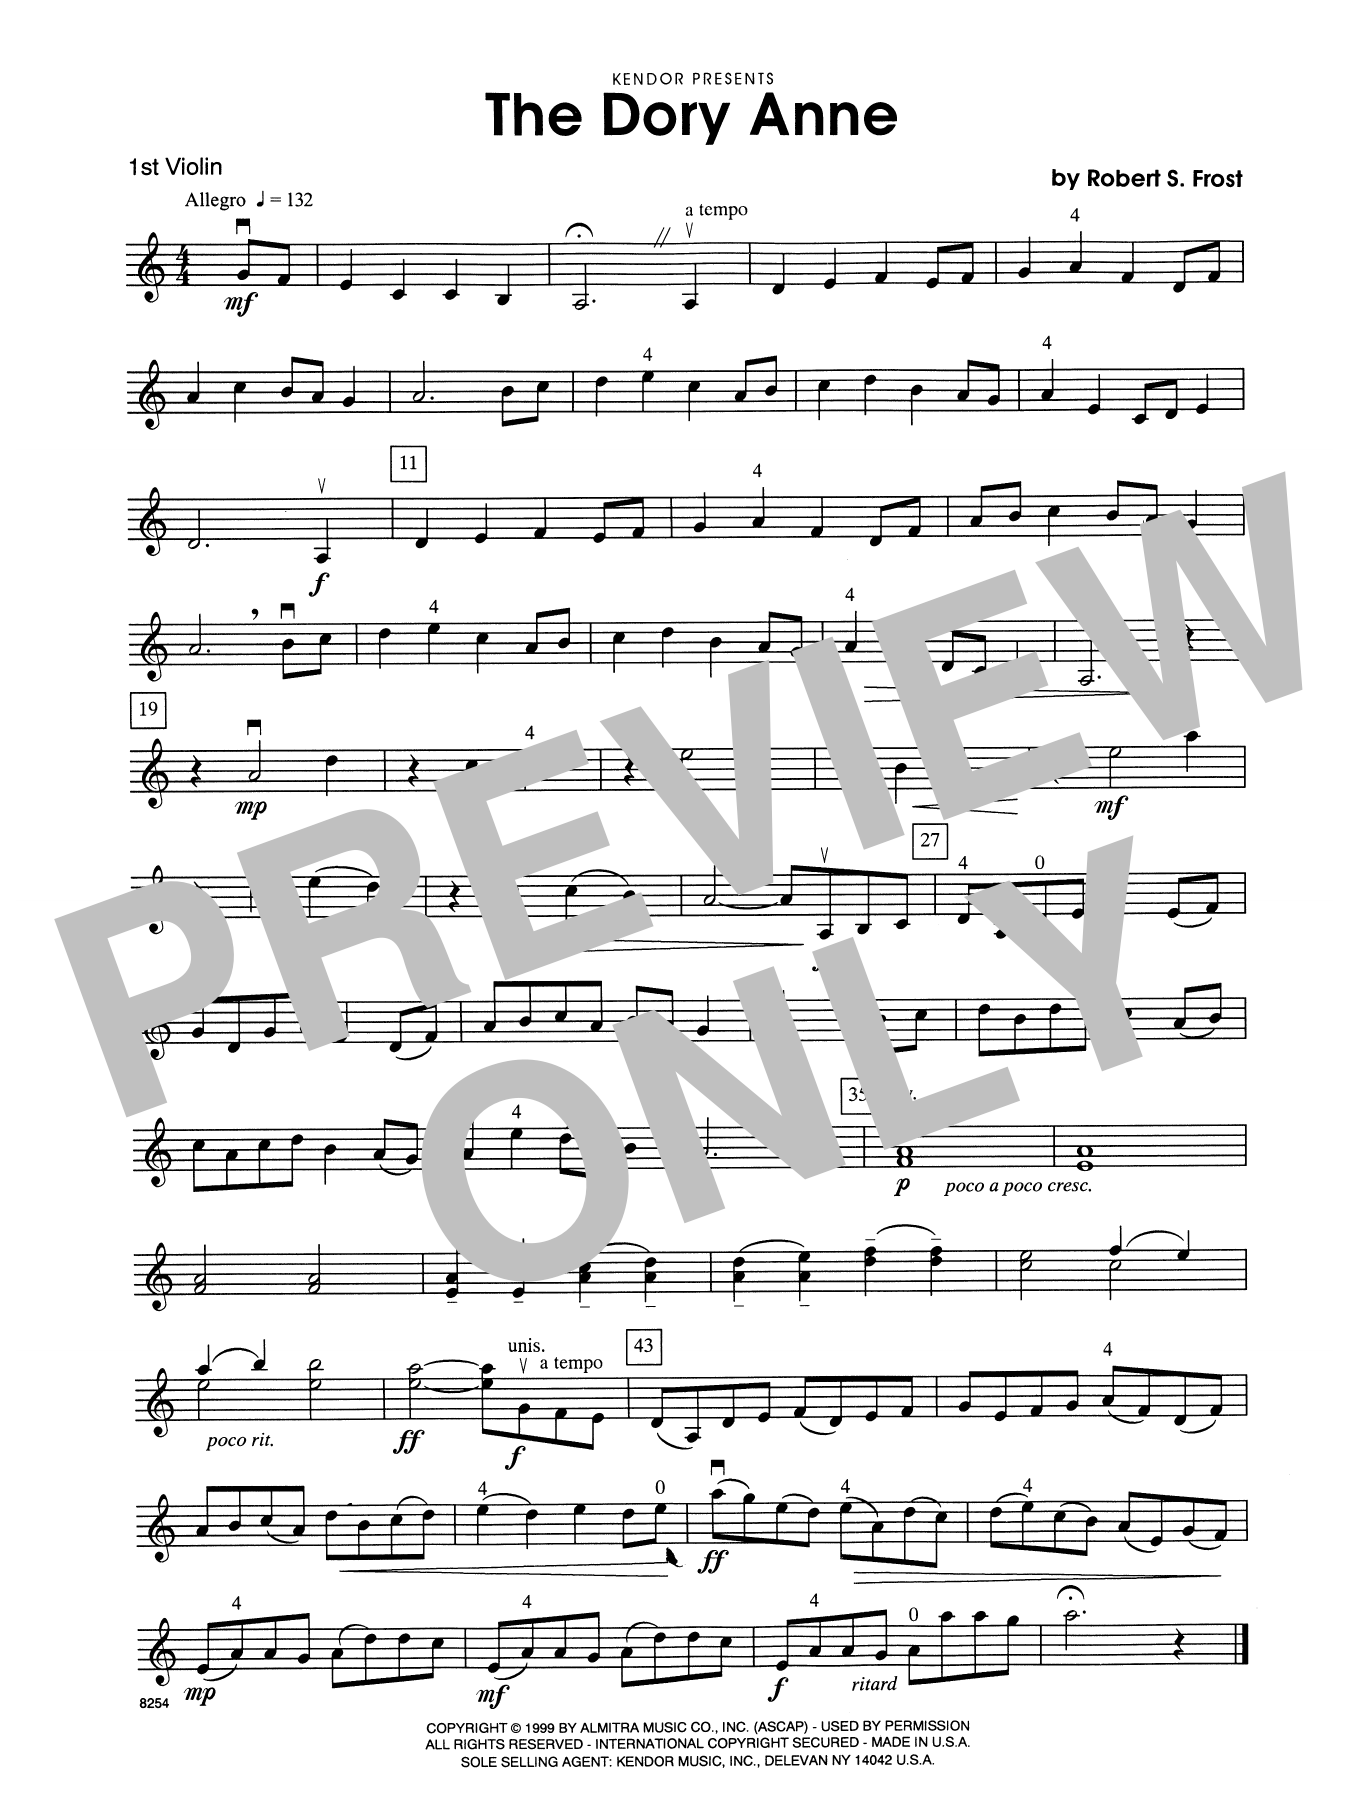 Download Robert S. Frost The Dory Anne - 1st Violin Sheet Music